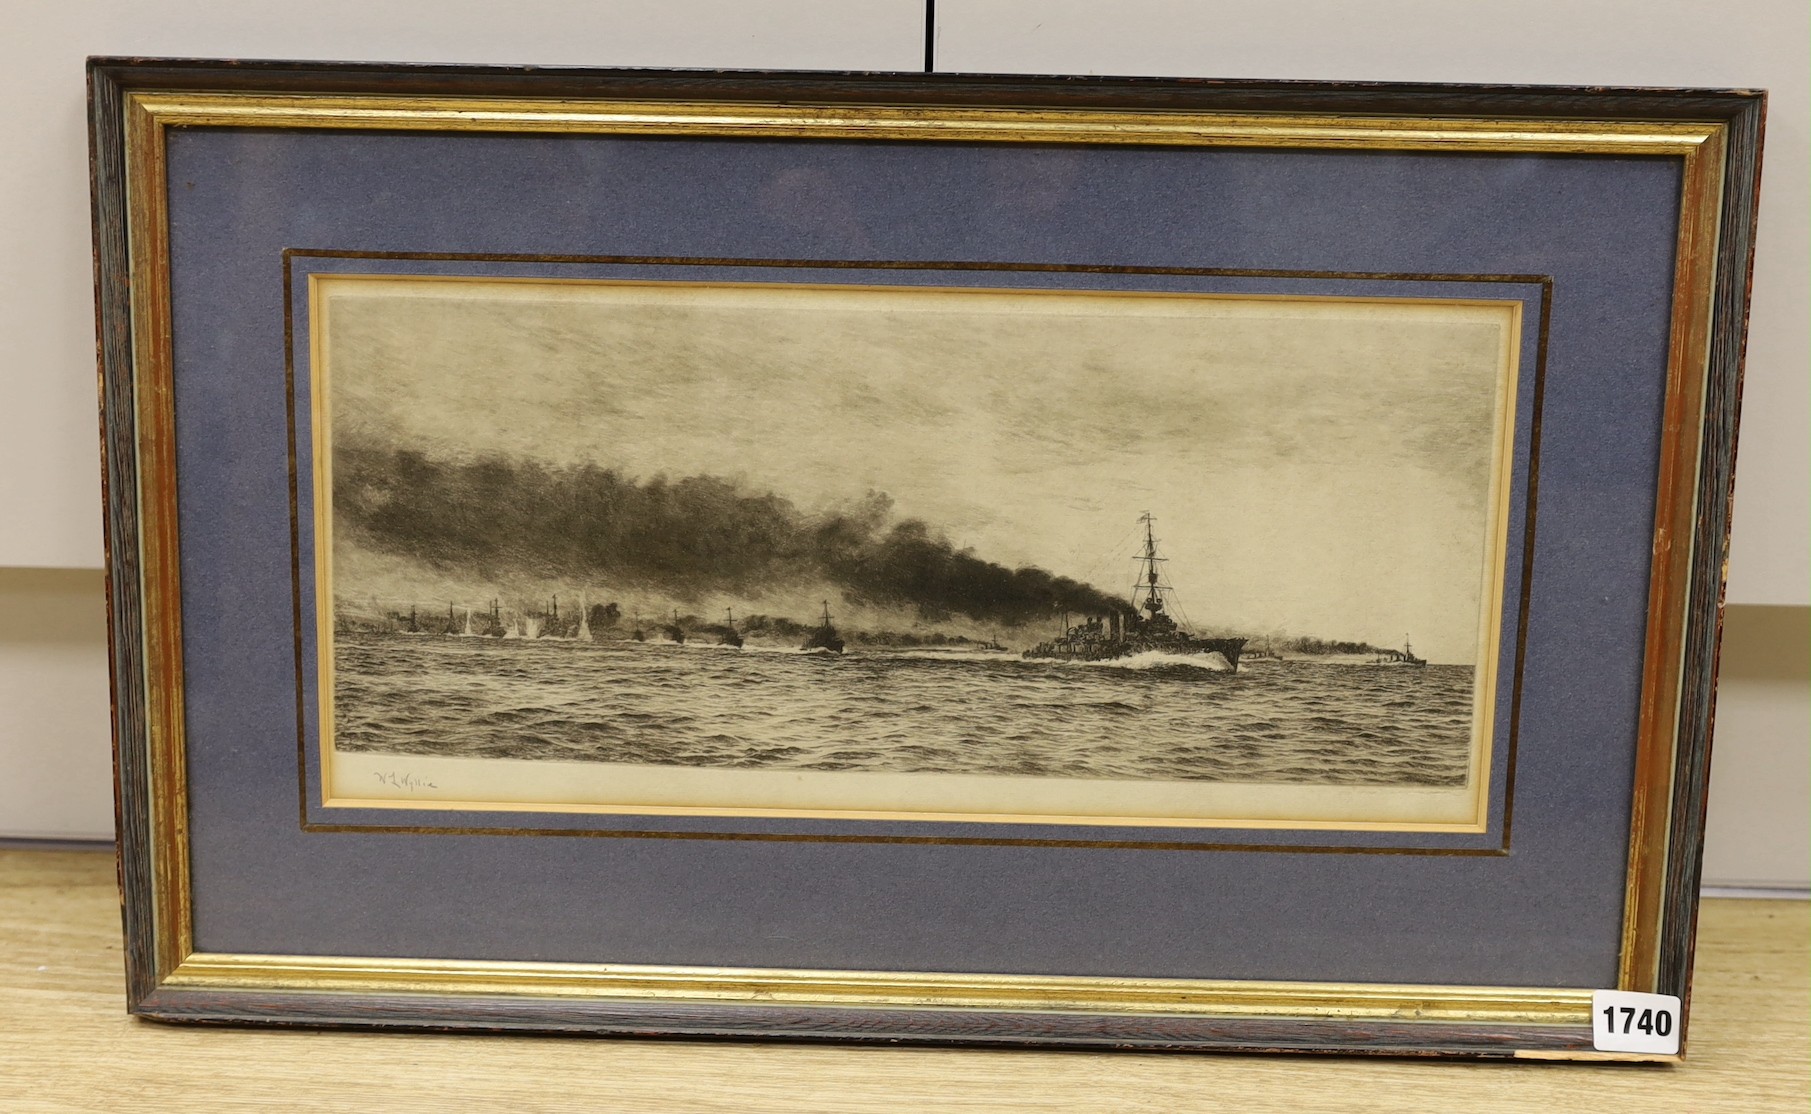 William Lionel Wyllie, etching, “HMS Champion and 13th Flotilla ahead of Beatty’s battle cruisers”, signed, 20 x 43cm